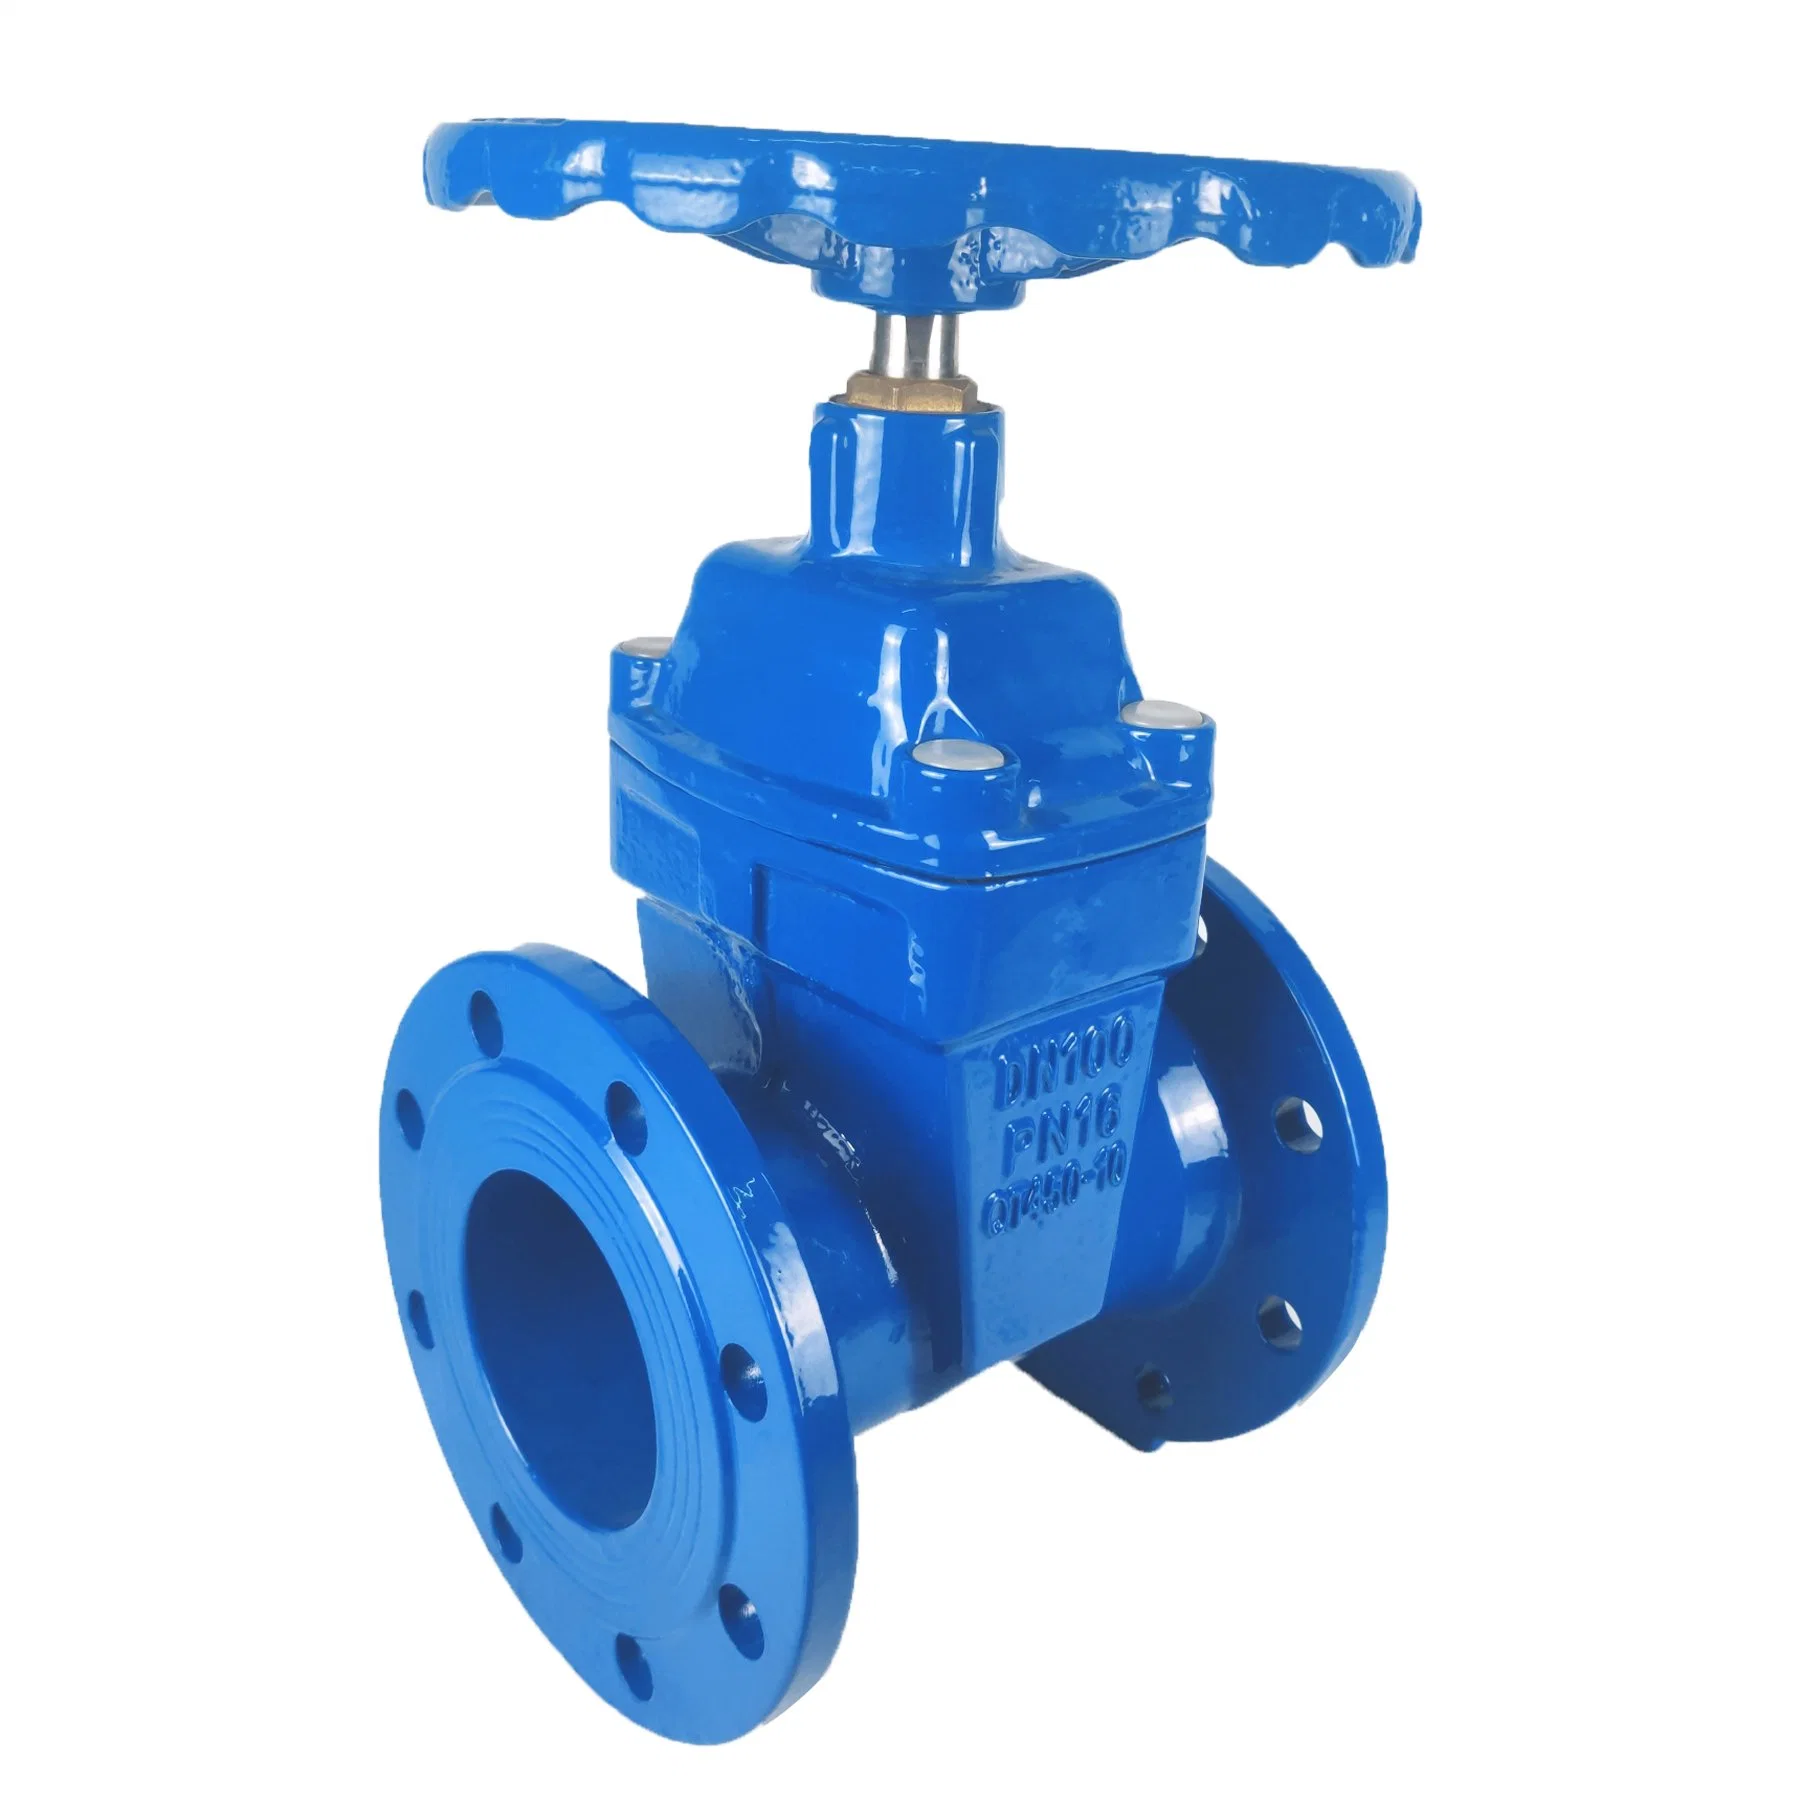 Flange Ductile Gate Stainless Steel Manual Electric Hydraulic Pneumatic Hand Wheel Industrial Gas Water Pipe Check Valve and Ball Butterfly Valve